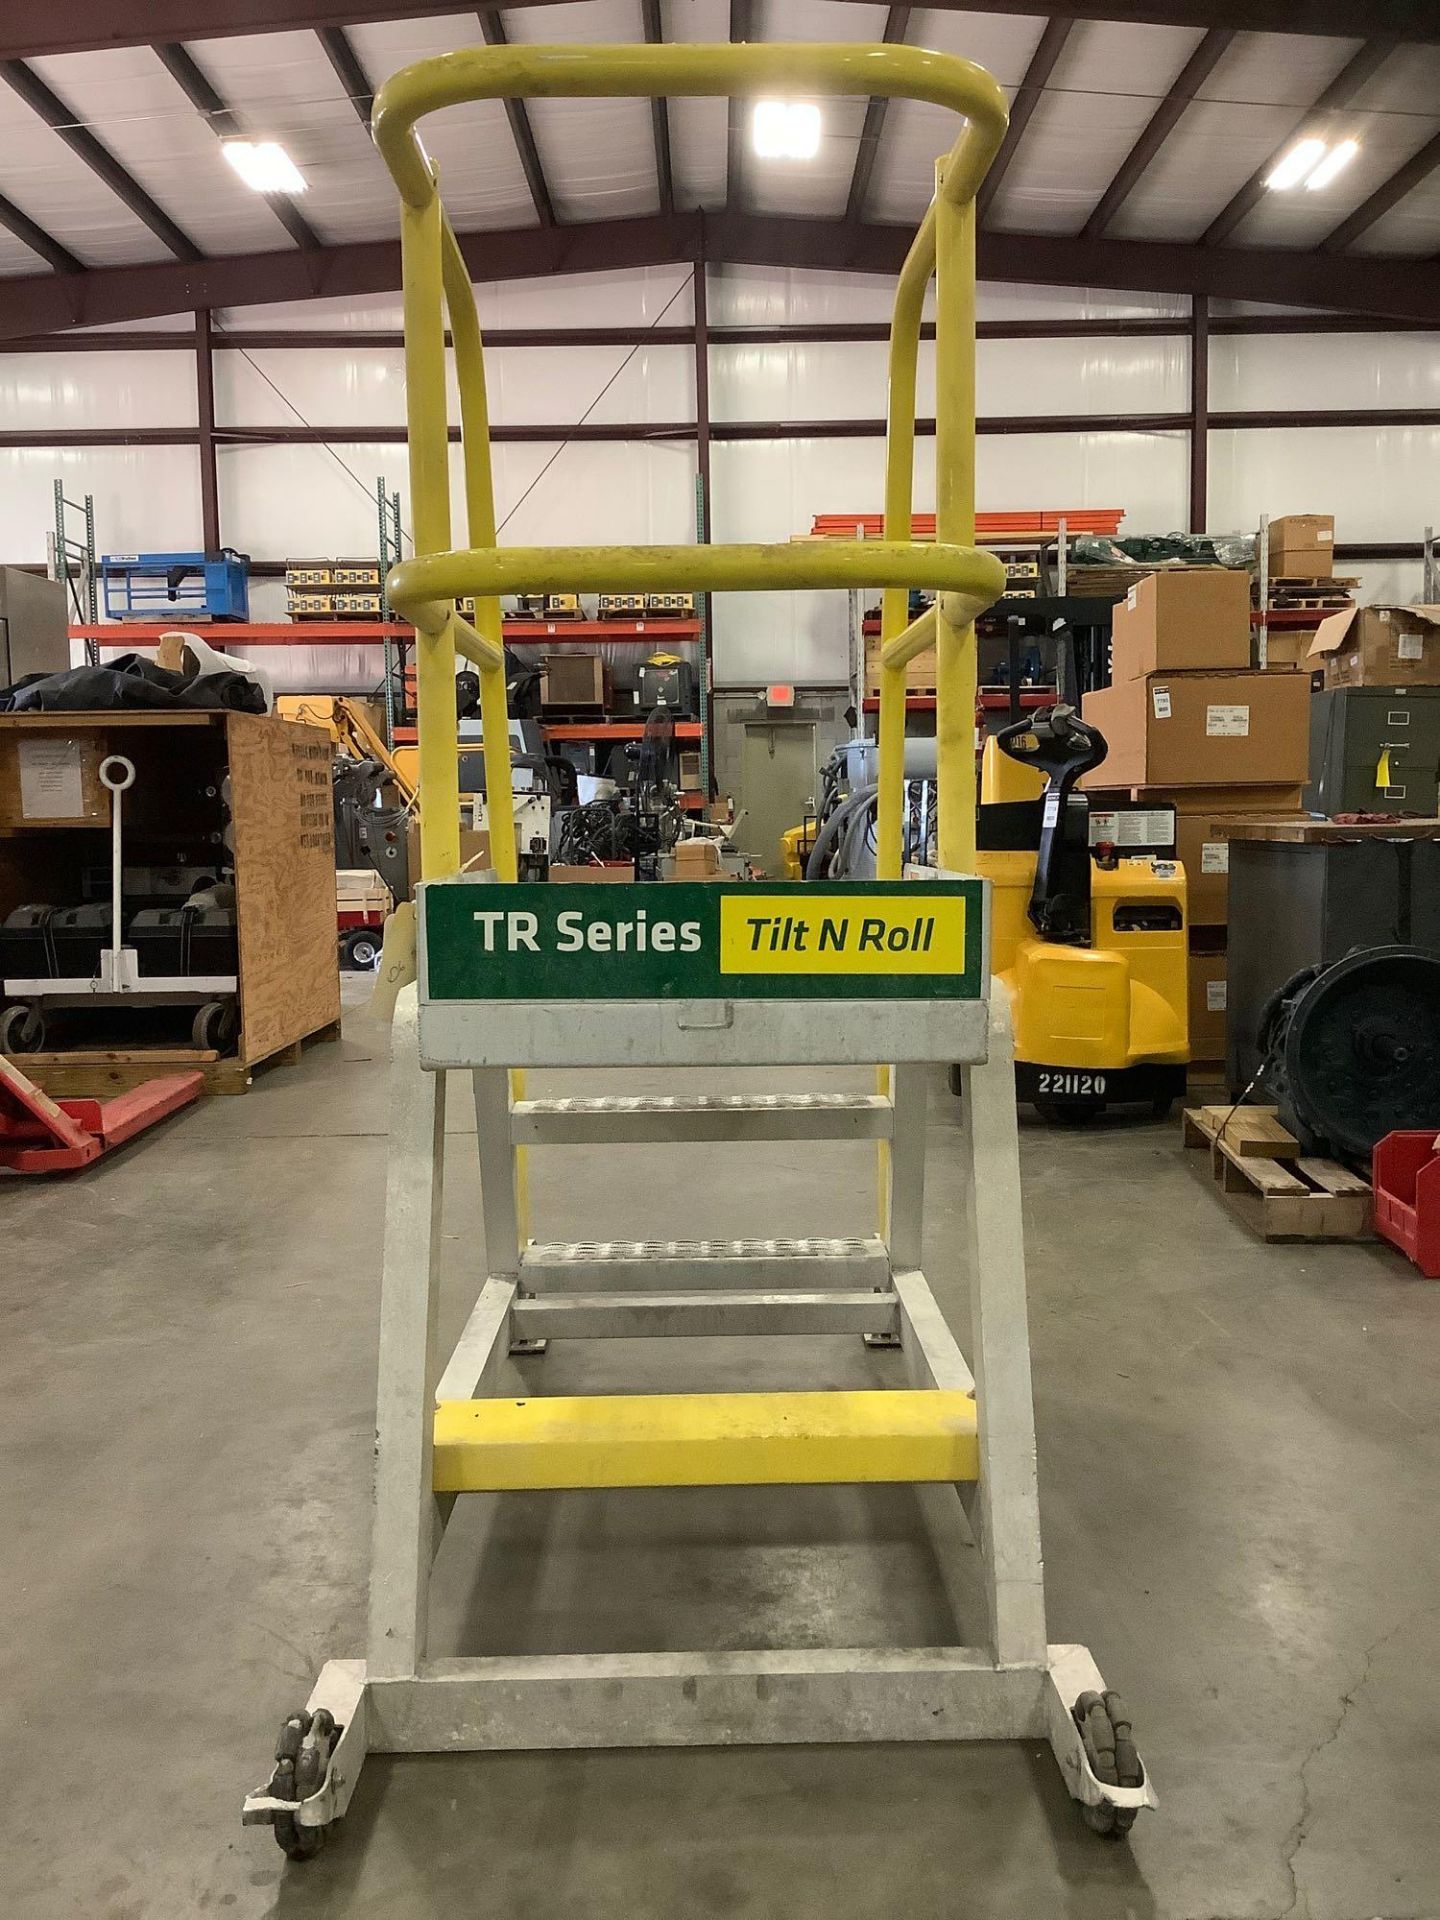 ROLLASTEP TR TILT N ROLL SERIES INDUSTRIAL LADDER, ALUMINUM CONSTRUCTION, APPROX 70in TALL x 32in WI - Image 4 of 9